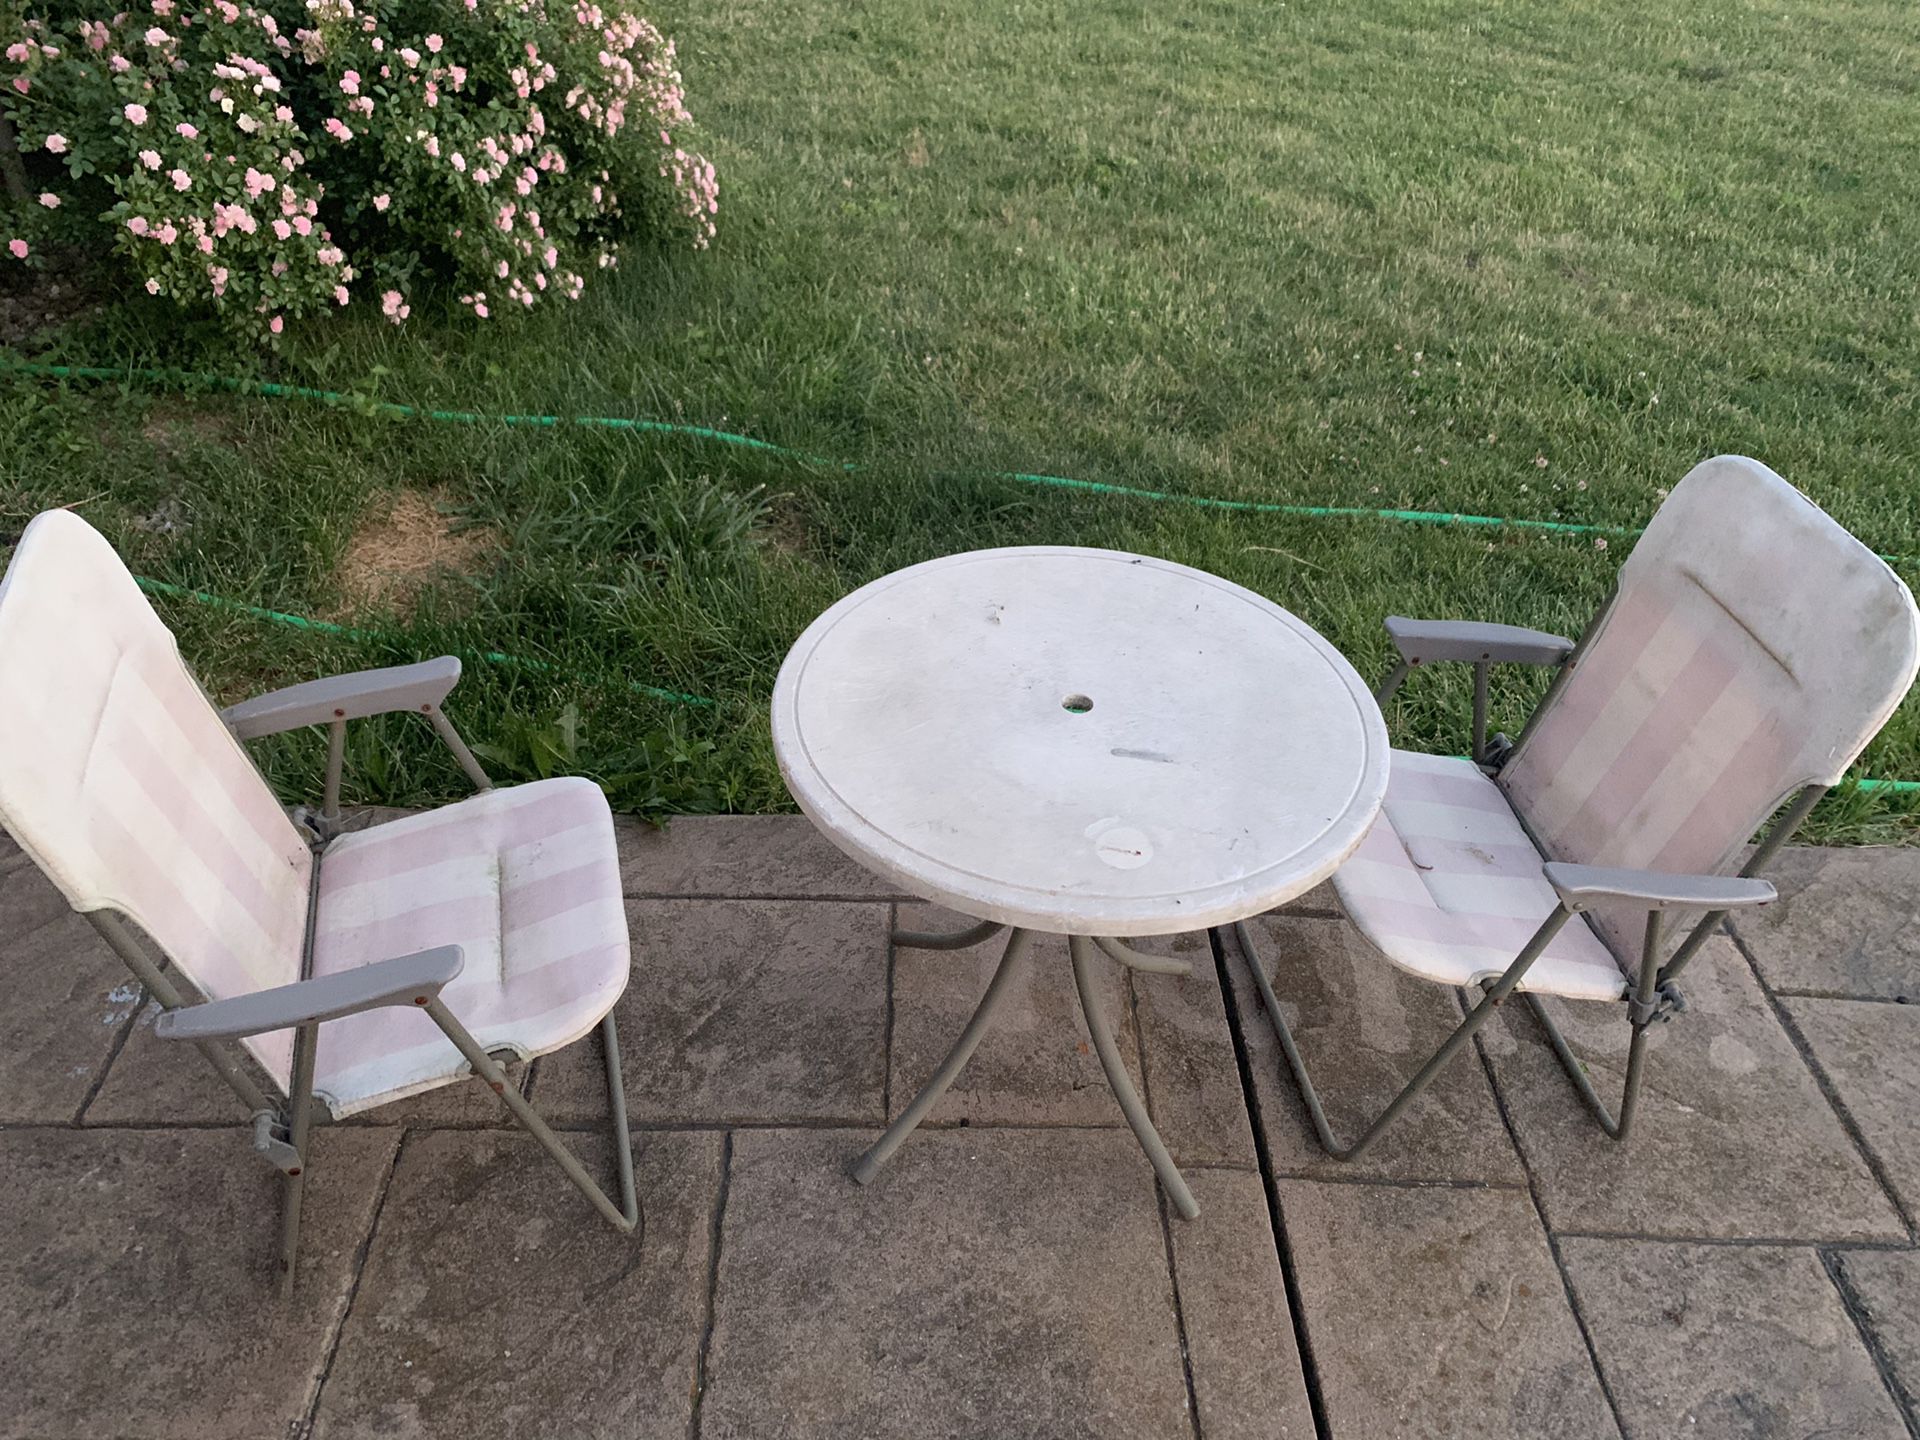 Small child’s outdoor table and chair set